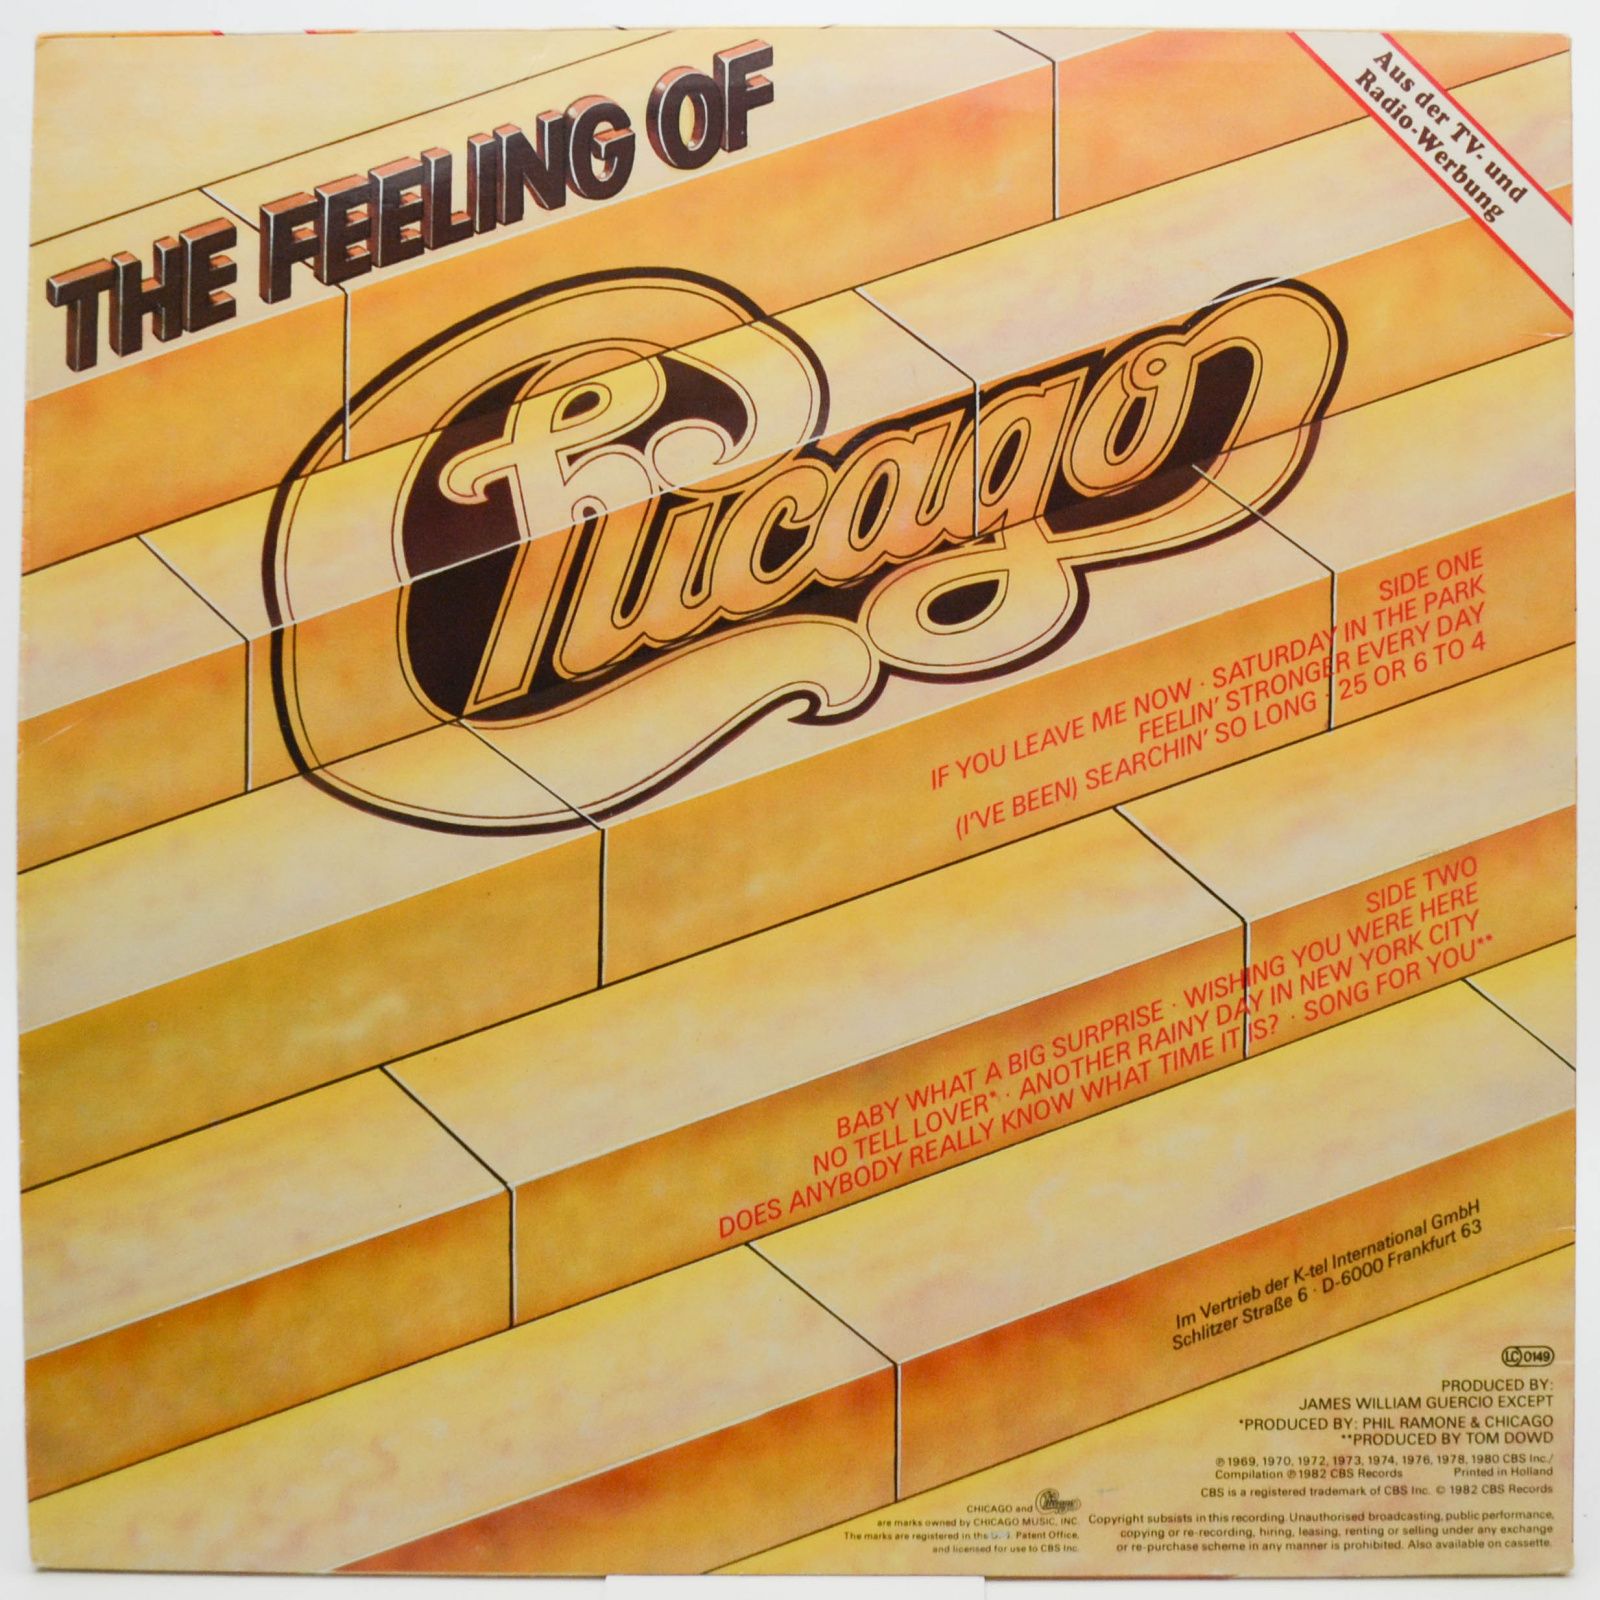 Chicago — The Feeling Of (A Collection Of Their Greatest Hits), 1982